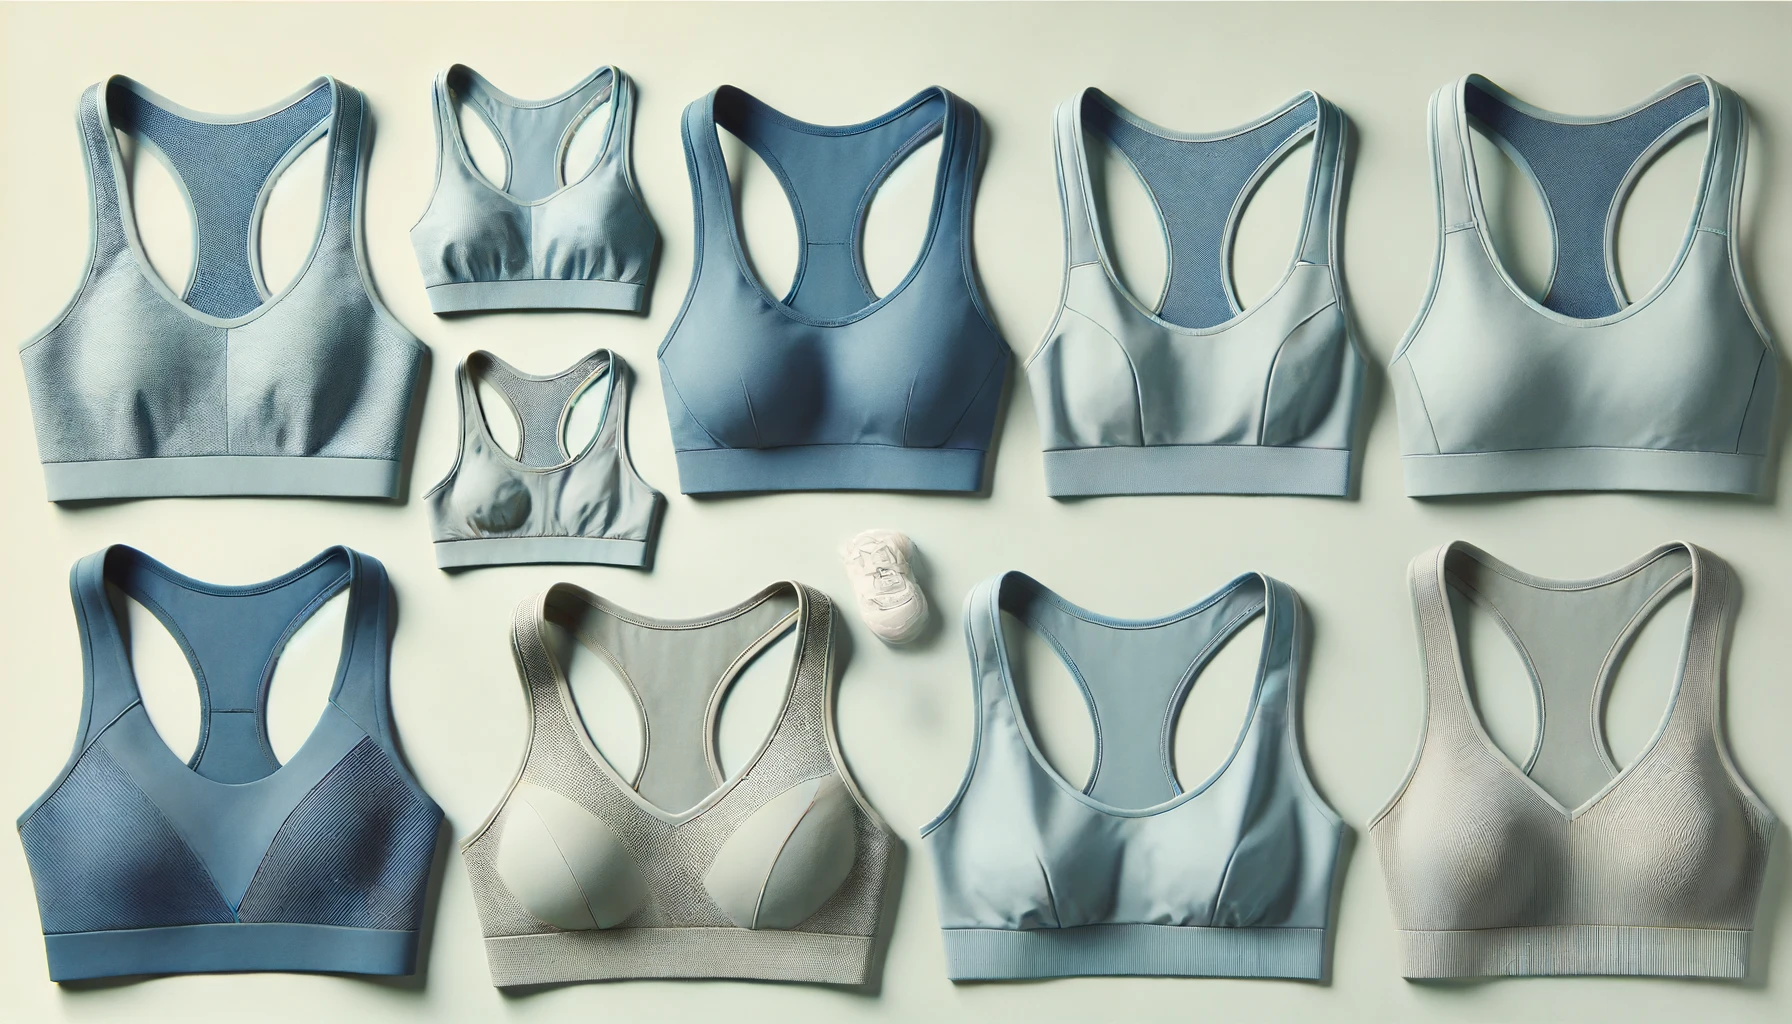 Multiple stylish sports bras similar to the one in the image, in light blue color, without any logos or text, displayed on a plain background.